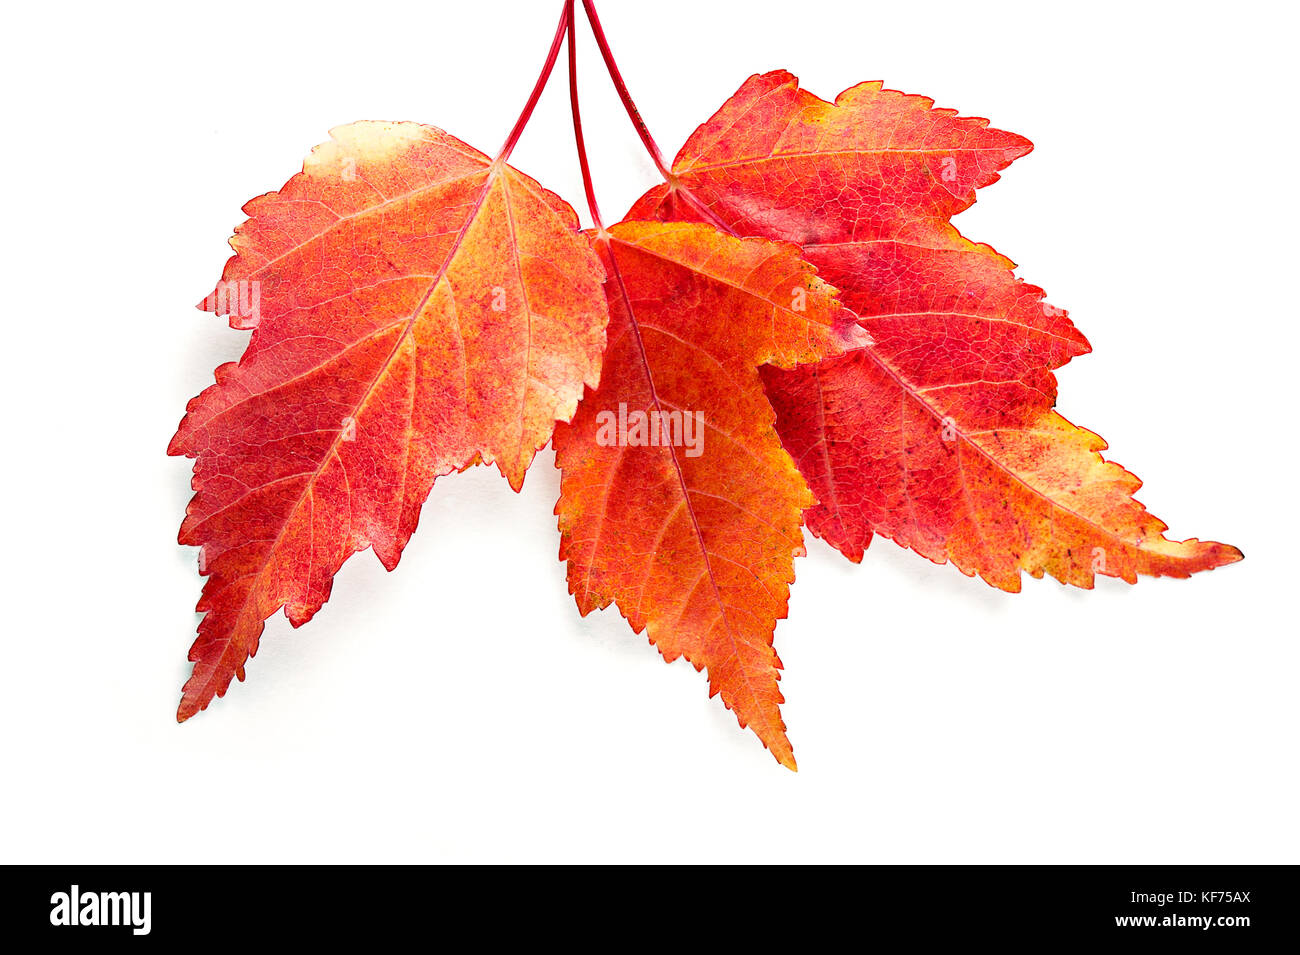 Three red autumn maple leaves isolated on white background. Top view. Close-up. Stock Photo